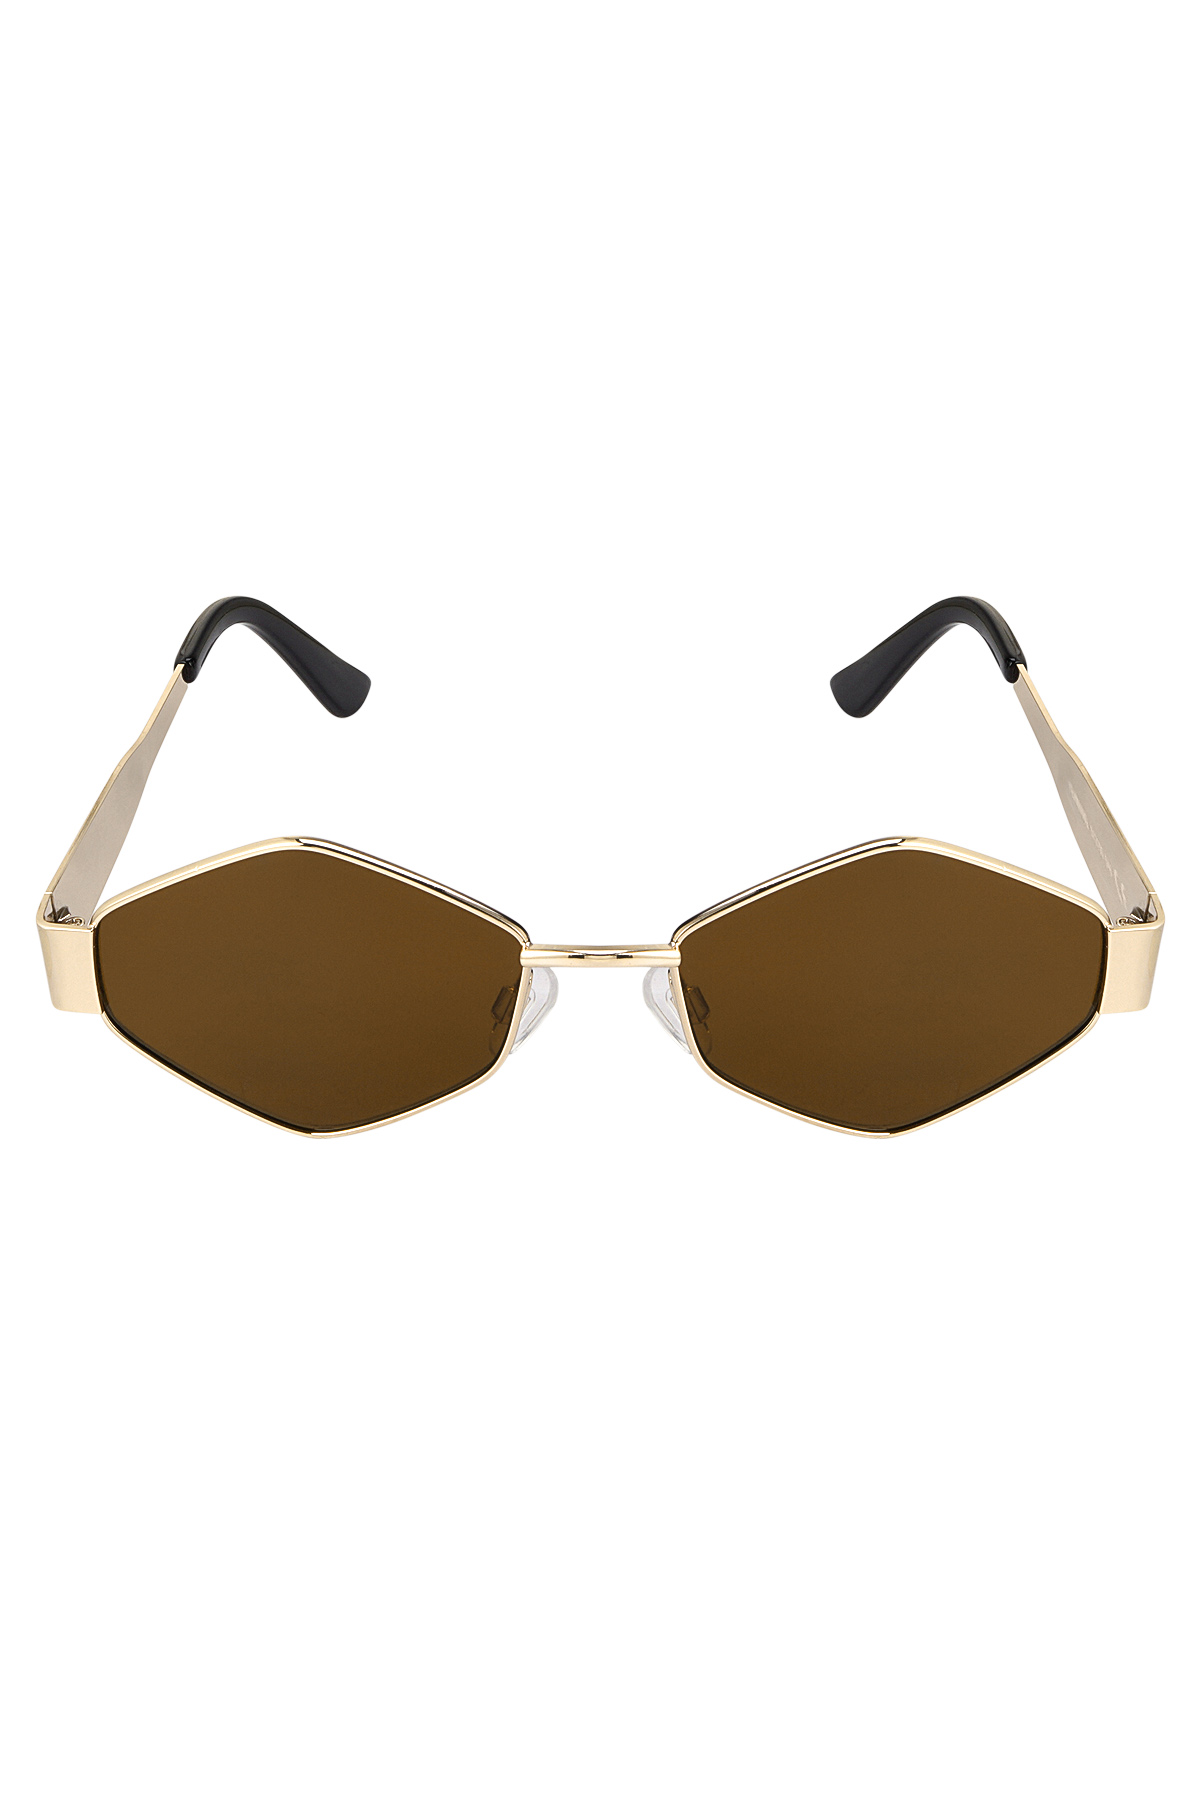 Sunglasses all night long - brown Picture6